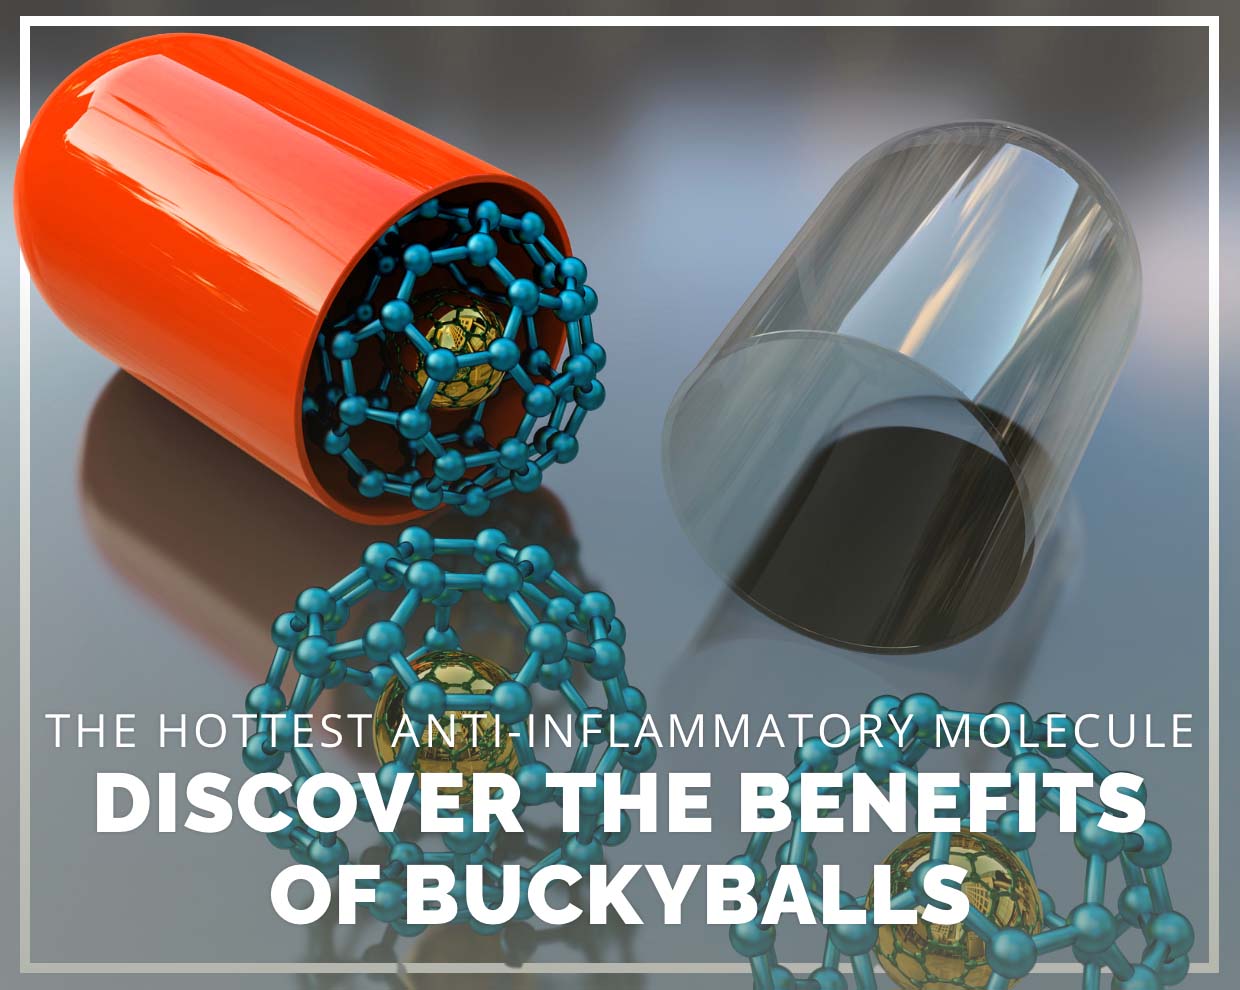 The hottest anti-inflammatory molecule: Discover the Benefits of Buckyballs